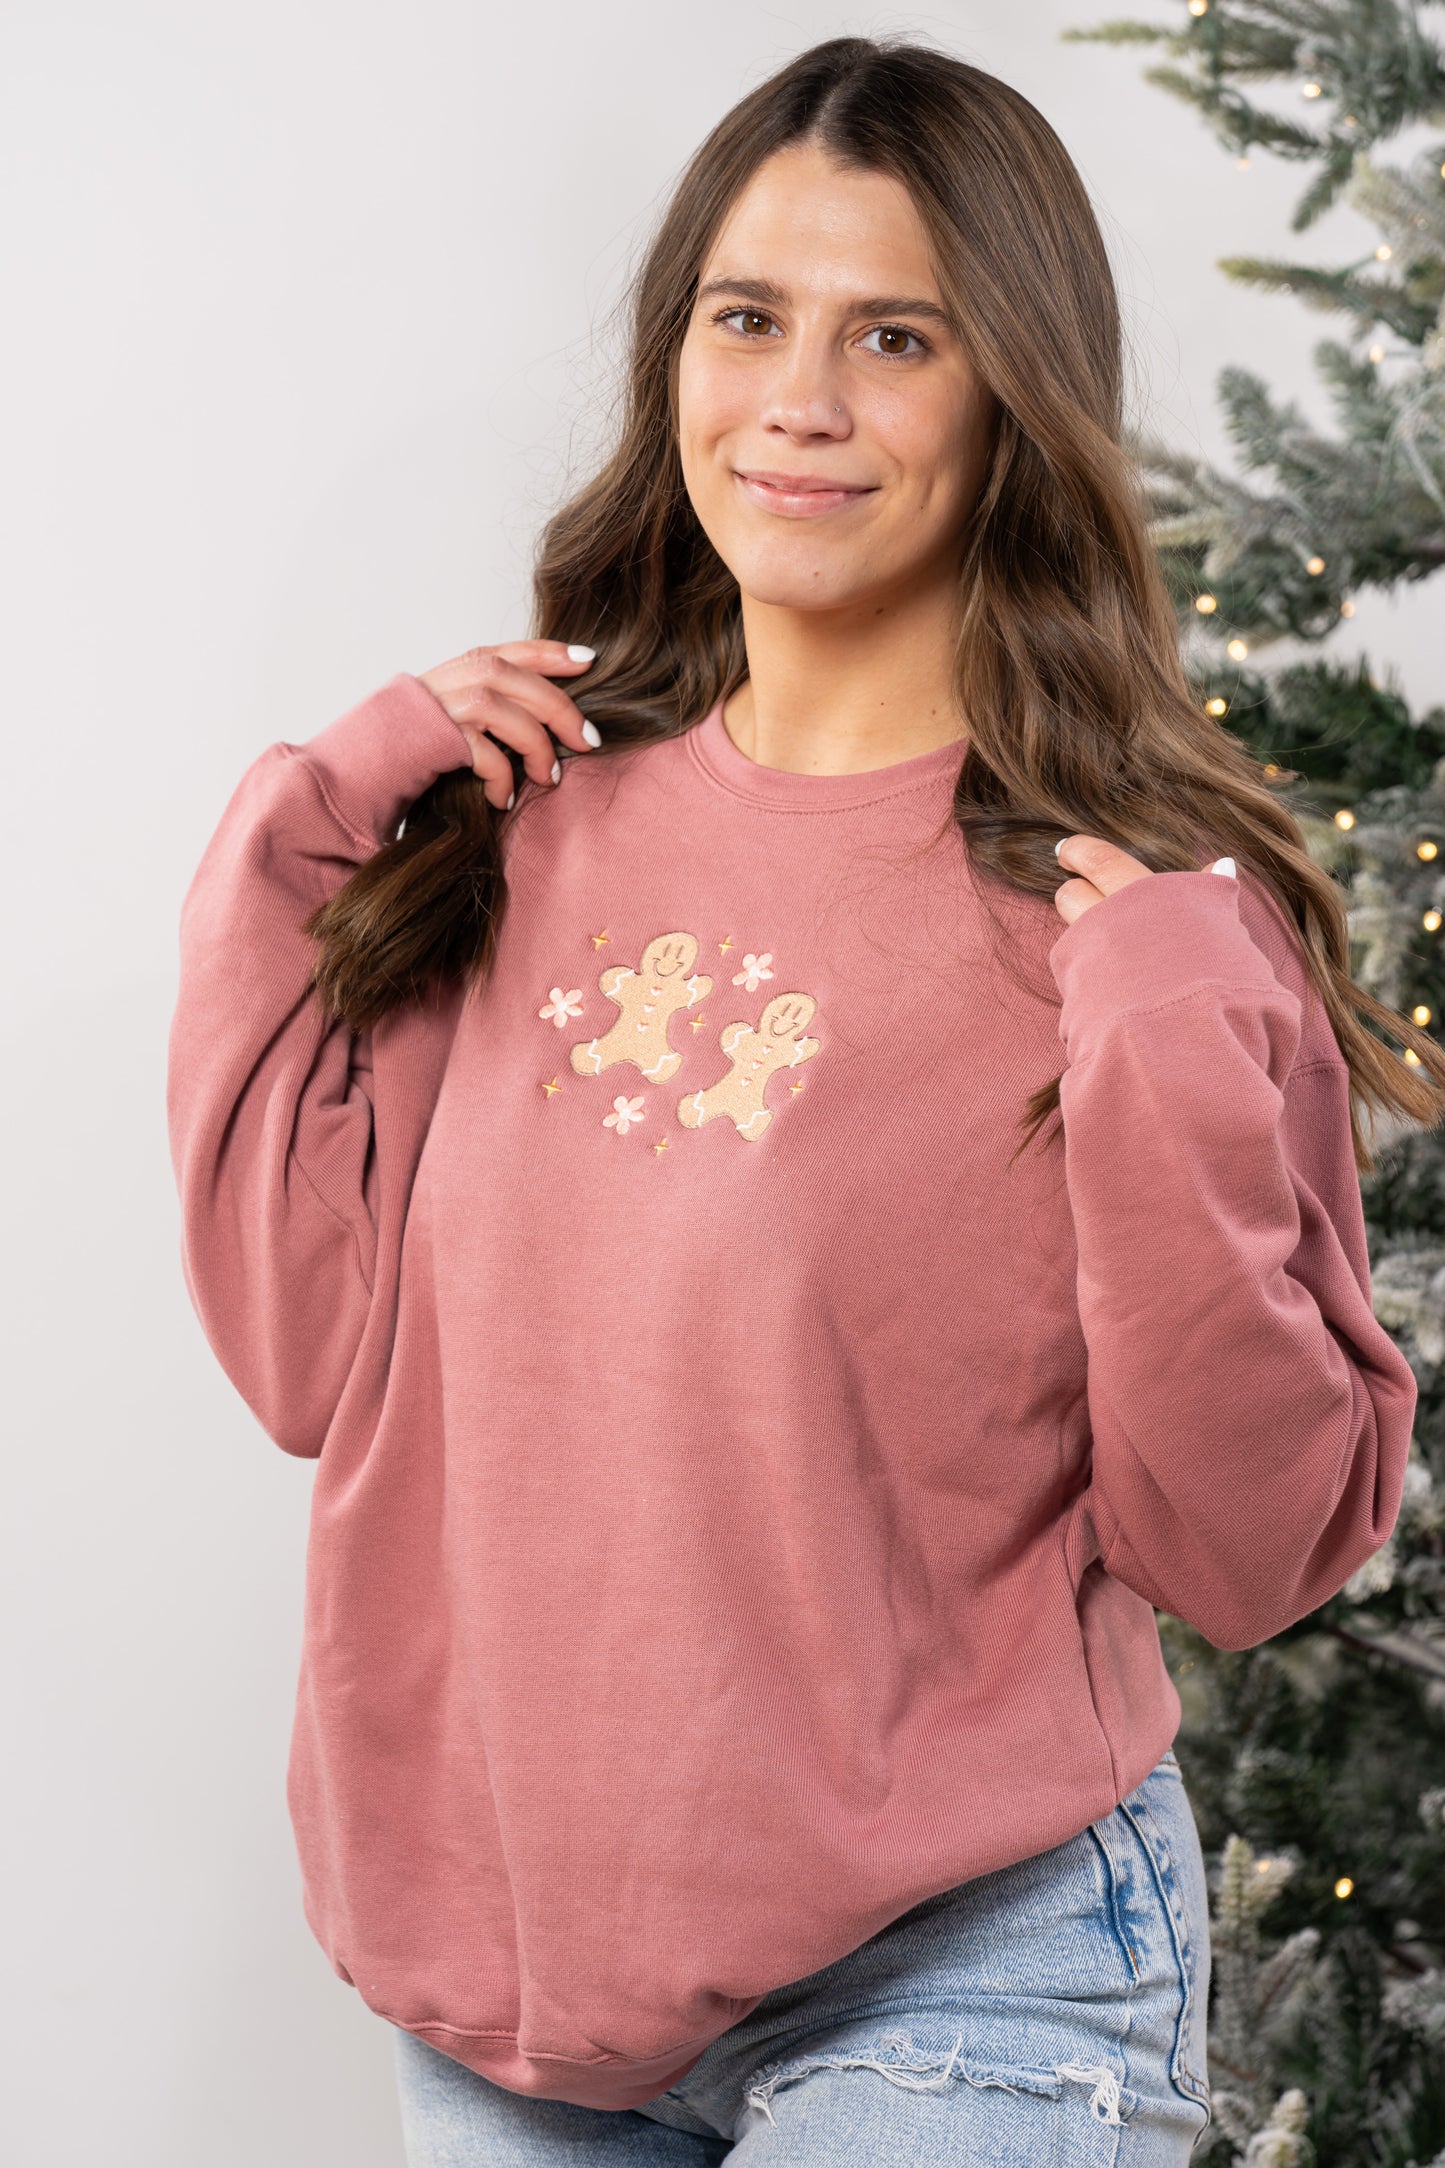 Daisy Gingerbread Cookies - Embroidered Sweatshirt (Mauve)